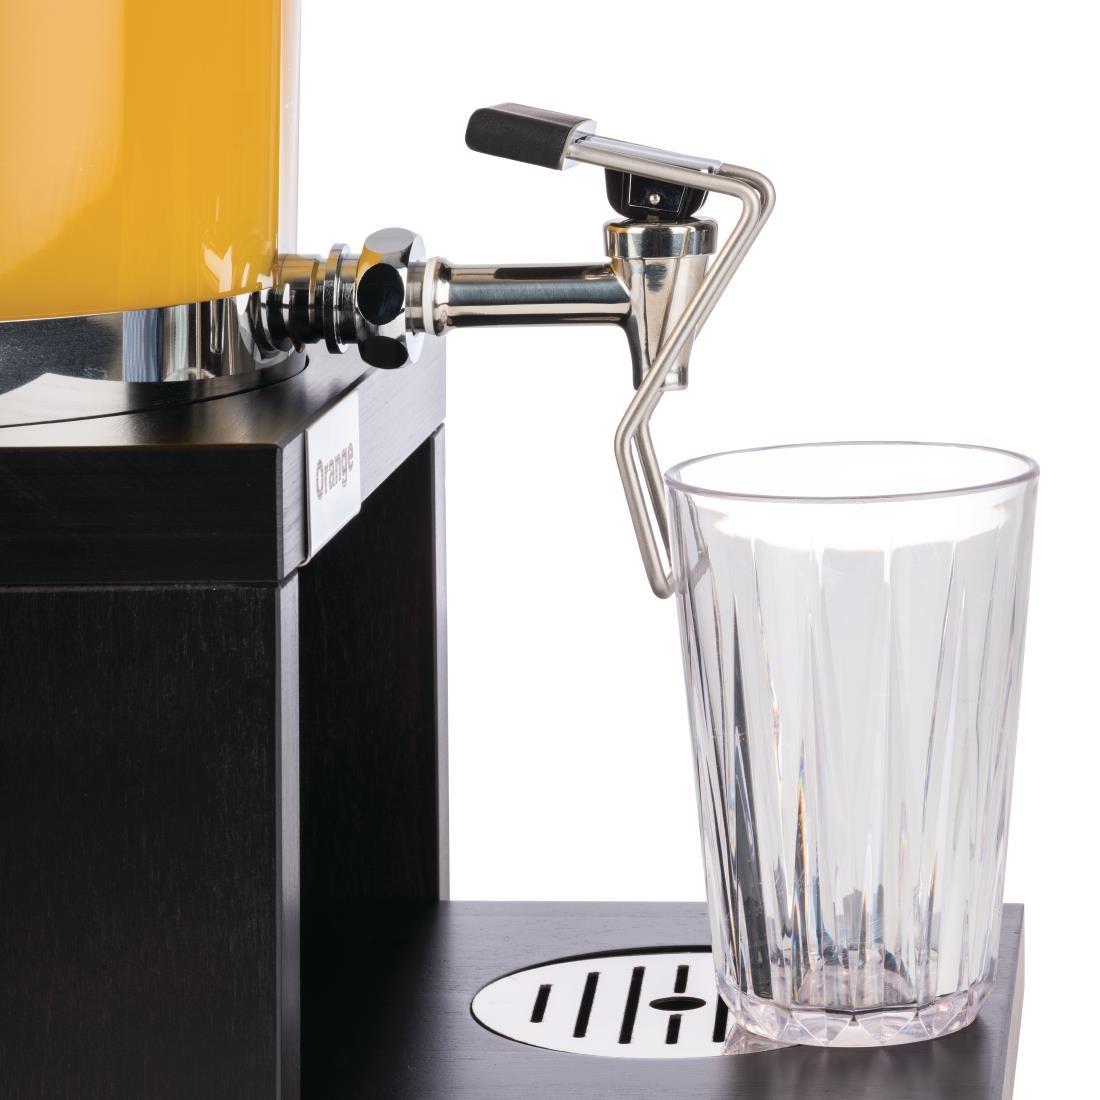 APS No-touch Adapter for Drink Dispensers